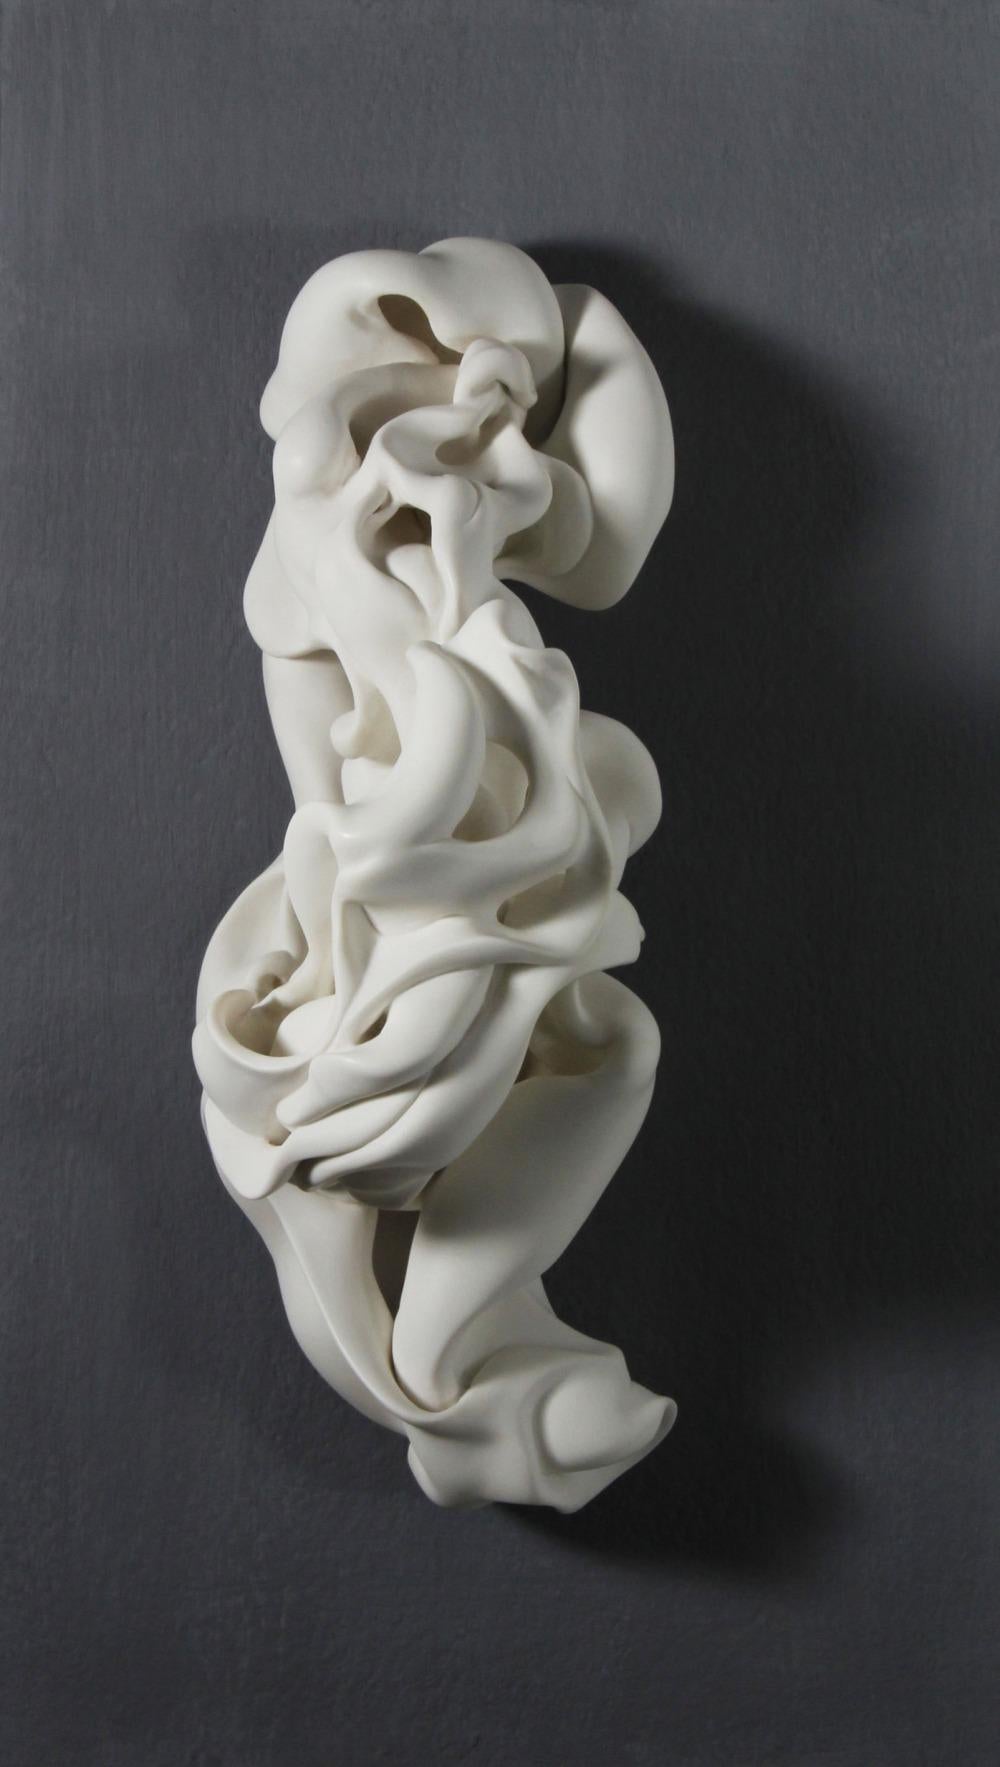 Motion is a unique sculpture by contemporary artist Sharon Brill. This is a wheel thrown altered and sandblasted porcelain sculpture, dimensions are 36 × 15 × 13 cm (14.2 × 5.9 × 5.1 in).
This sculpture is a unique piece signed by the artist and